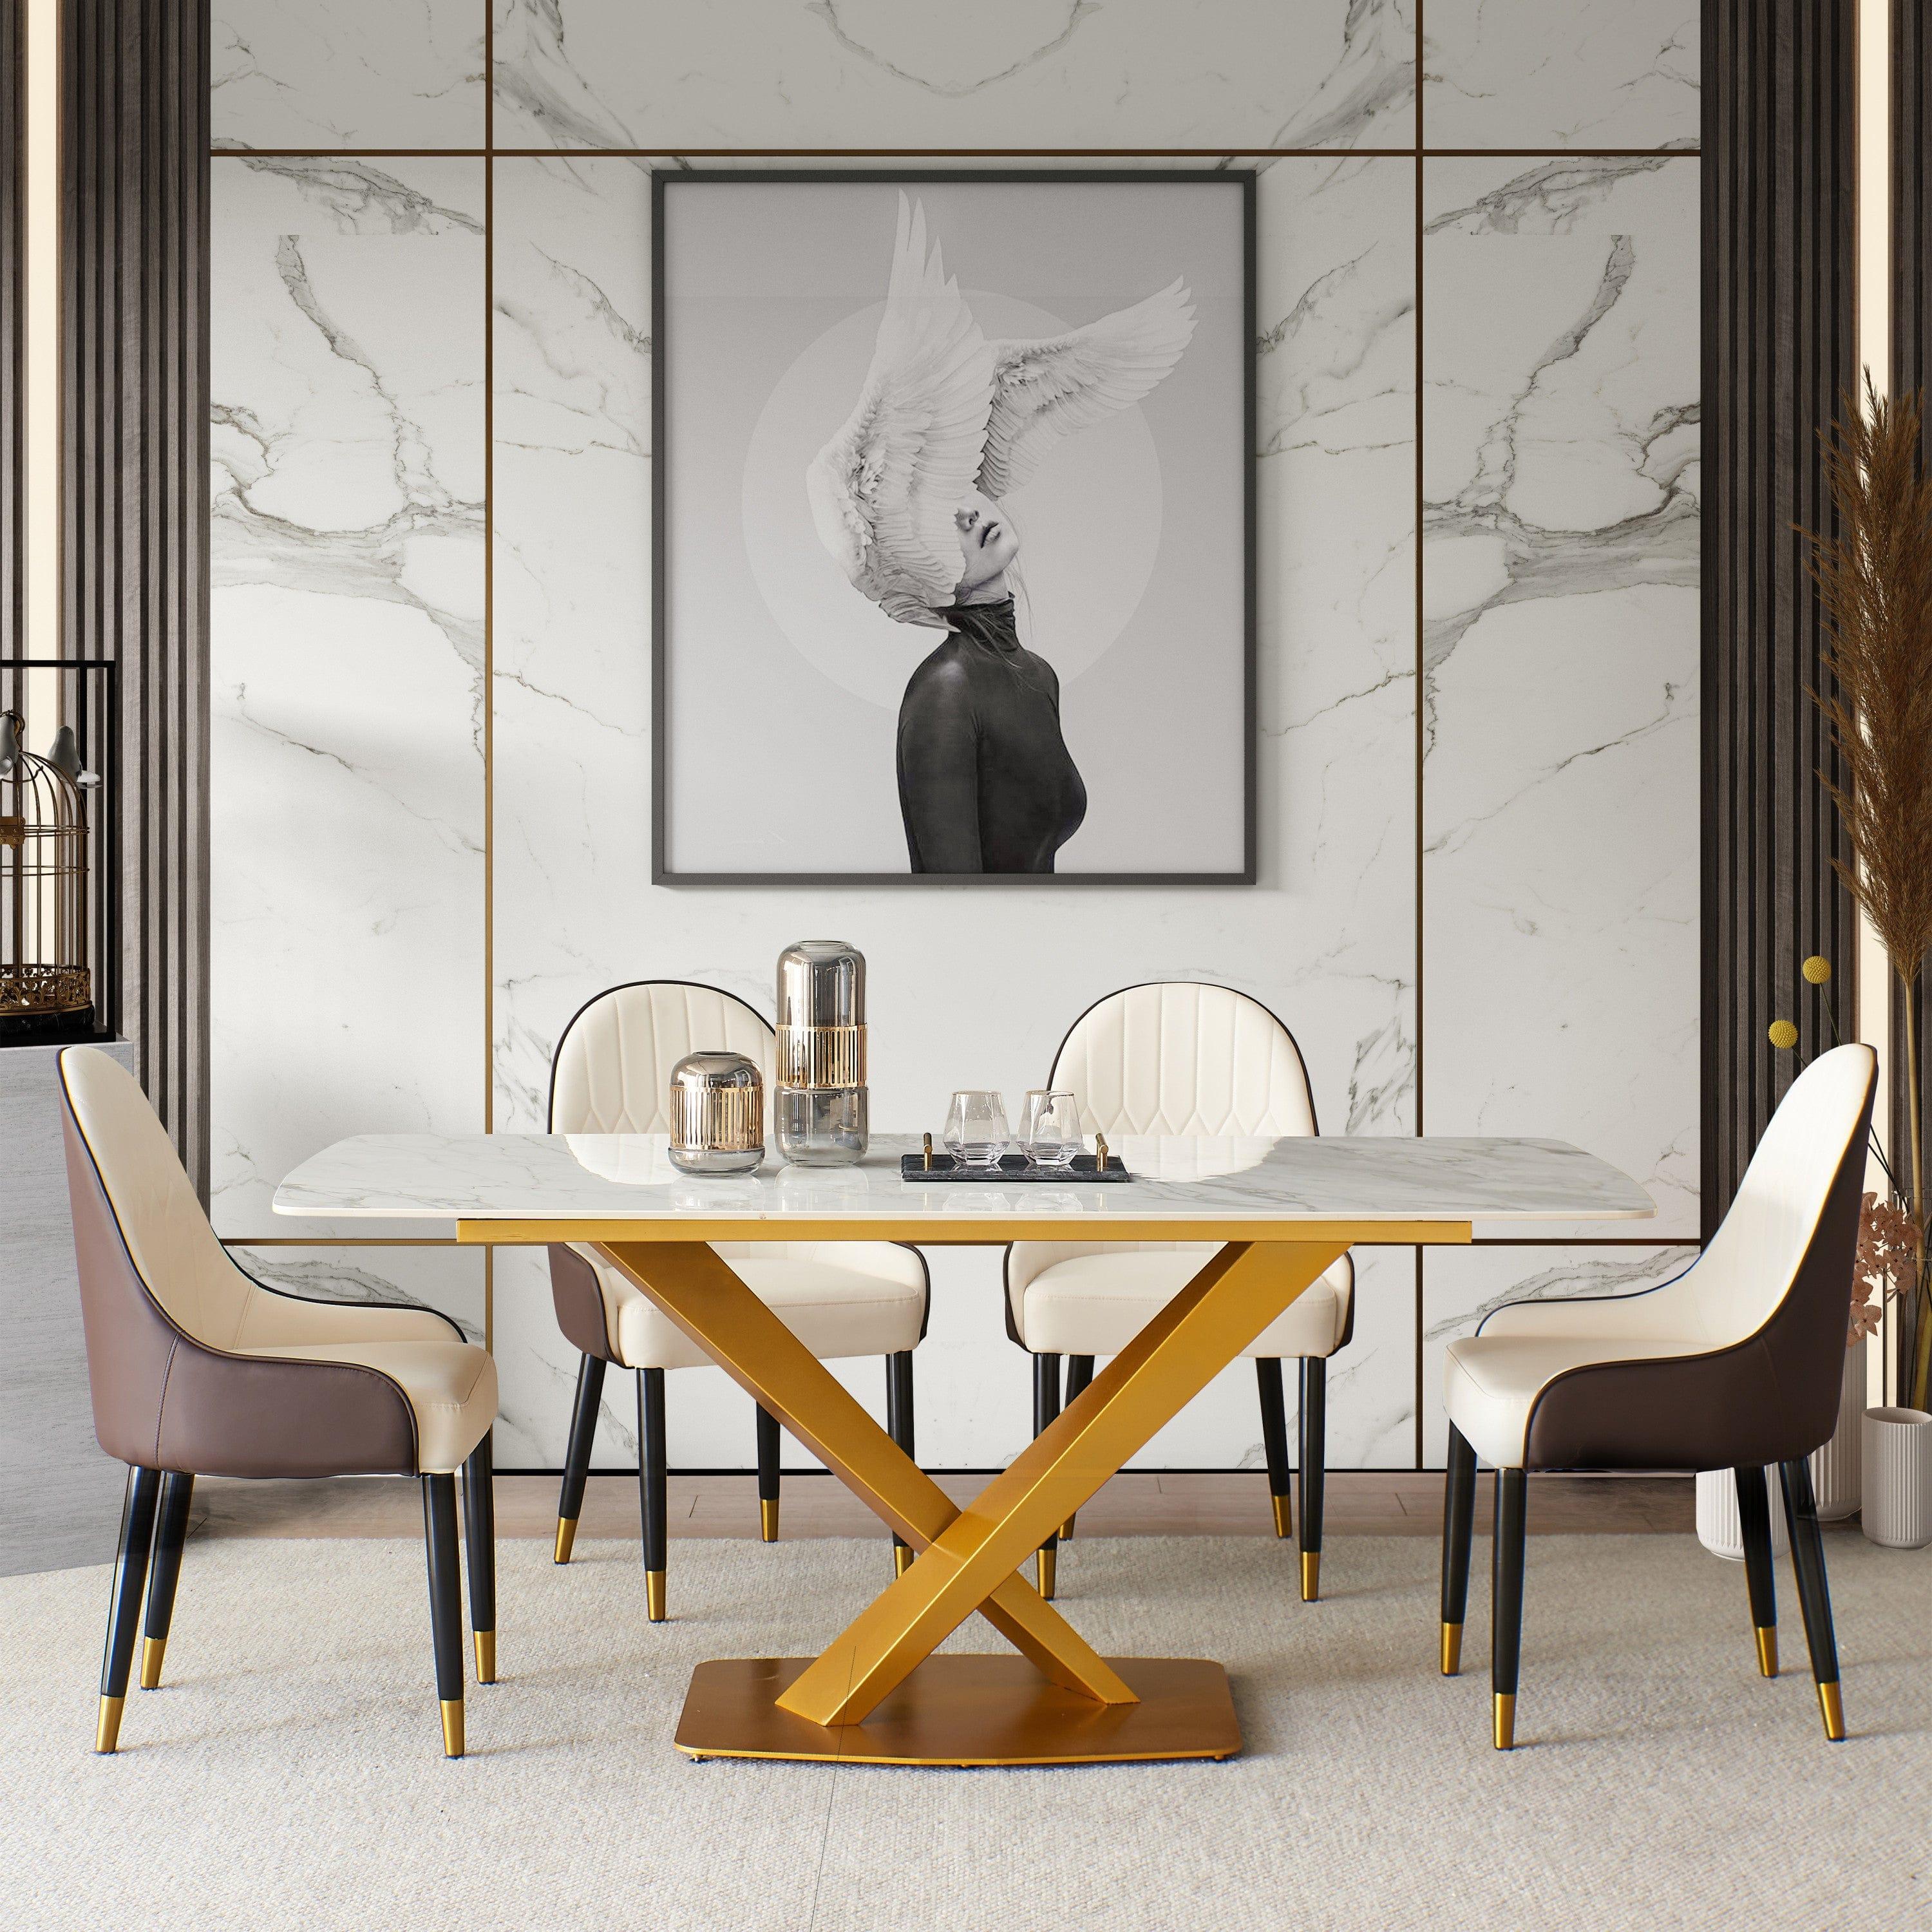 Shop Sintered stone dinning table ,Carrara white color , Modern Dinning table with solid Gold Carbon Stell base 63" Mademoiselle Home Decor